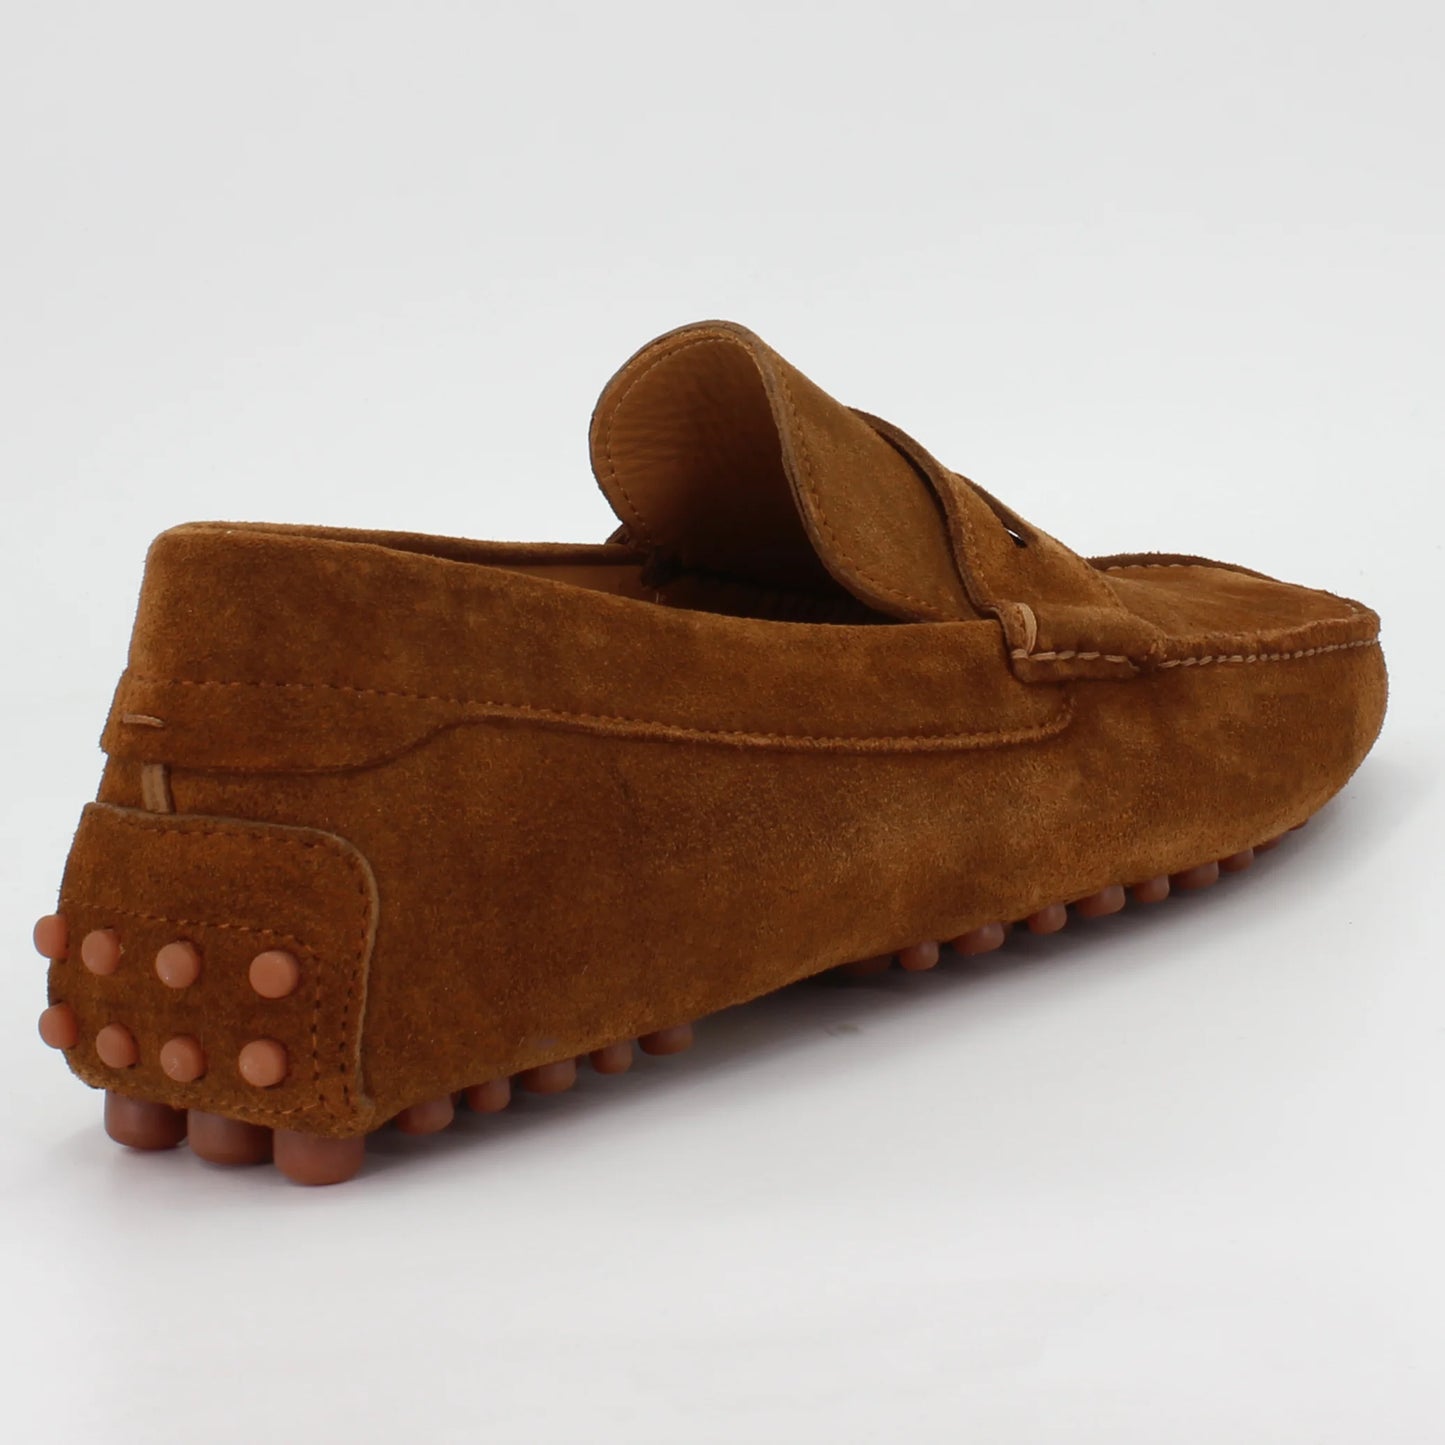 Shop Handmade Italian Leather suede moccasin in snuff velour (UO460002) or browse our range of hand-made Italian shoes for men in leather or suede in-store at Aliverti Cape Town, or shop online. We deliver in South Africa & offer multiple payment plans as well as accept multiple safe & secure payment methods..